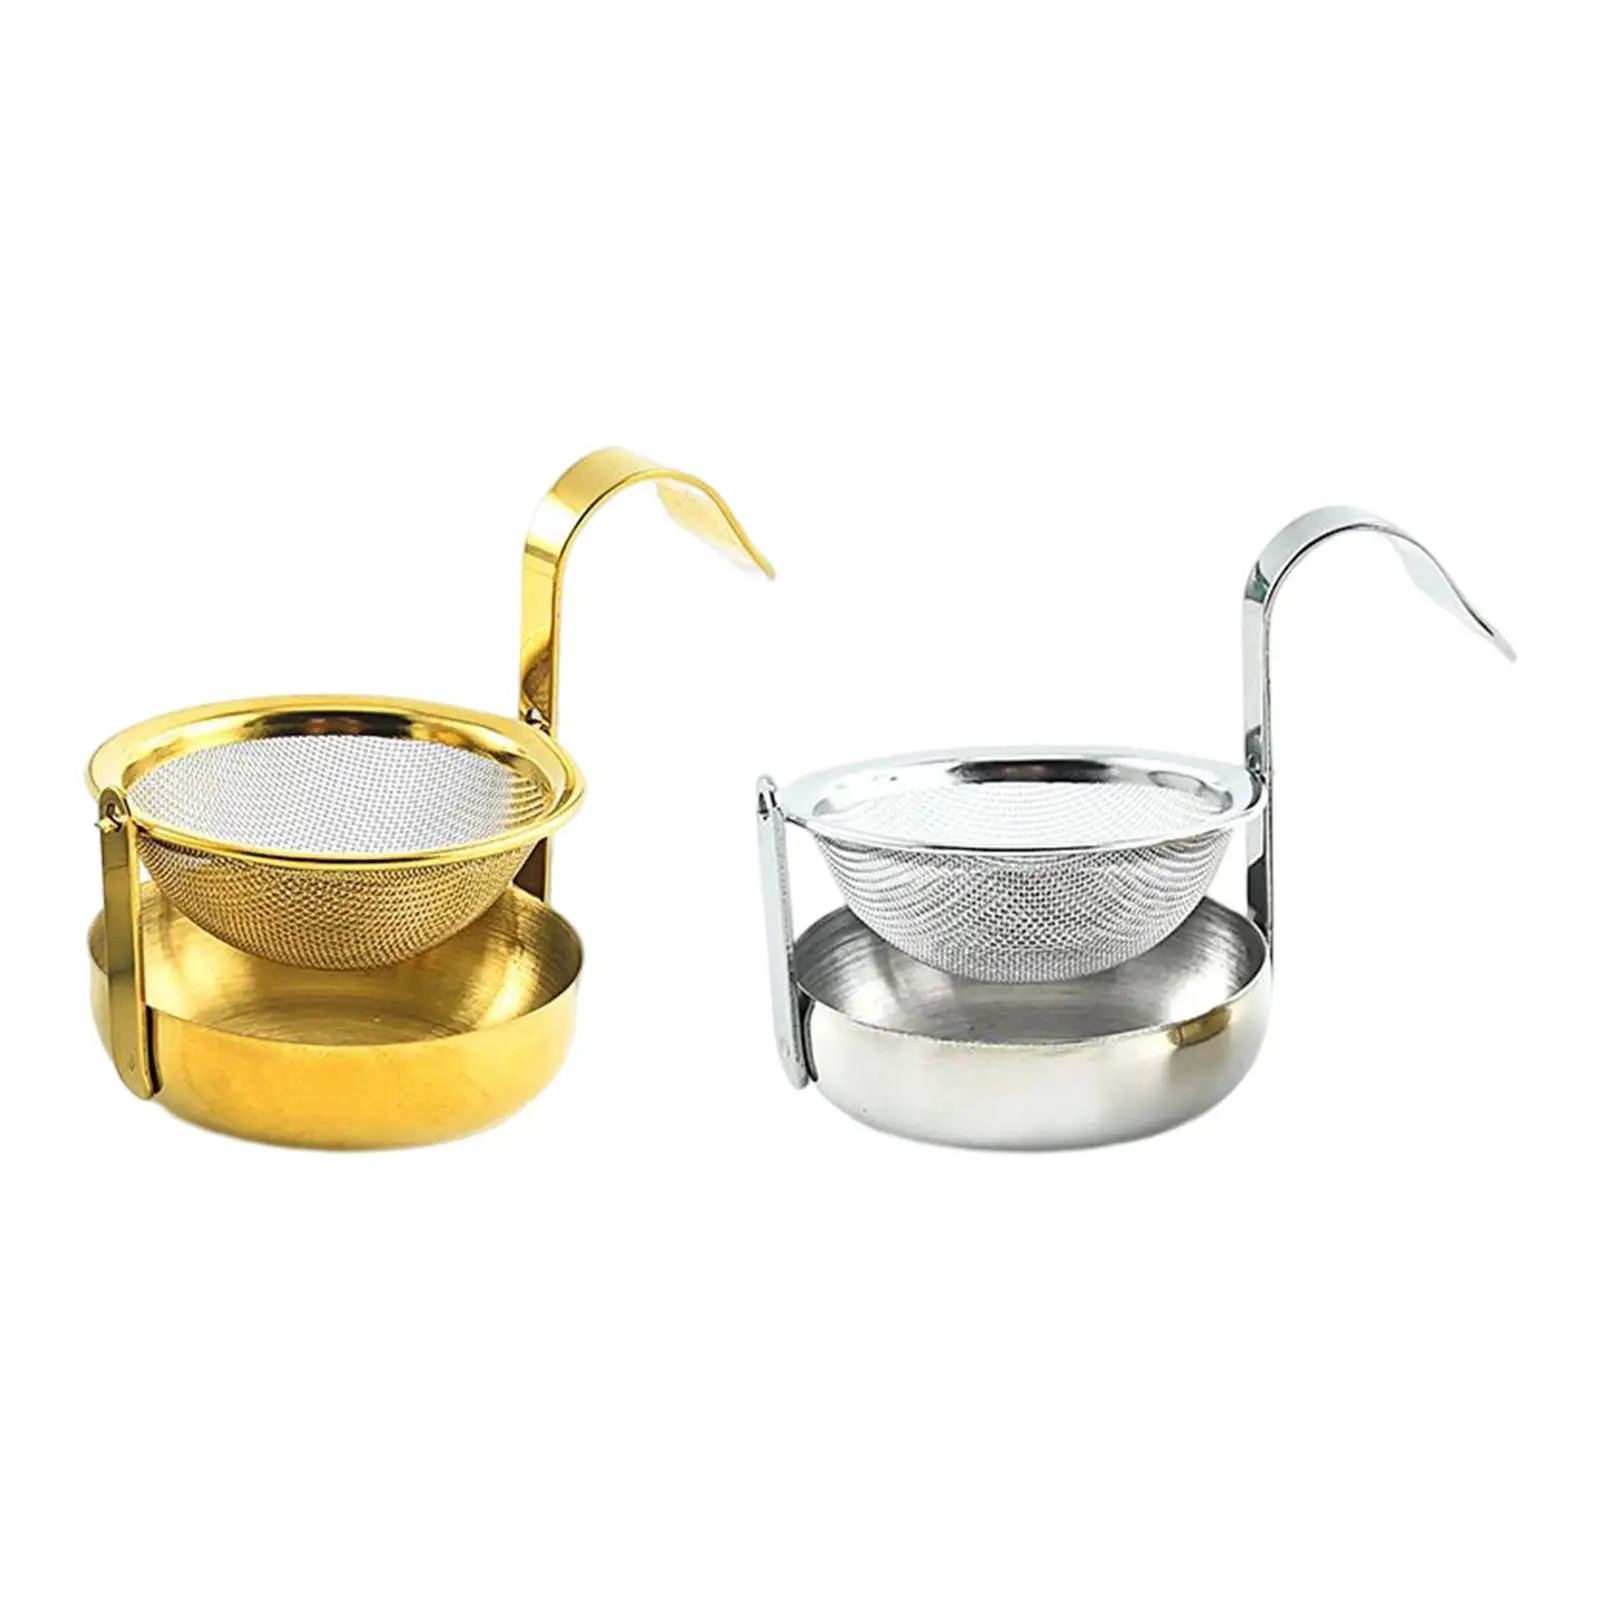 360 Rotatable Tea Strainer 304 Stainless Steel Reusable Fine Mesh Tea Accessories Tea Filter for Party Cafe Home Bar Kitchen